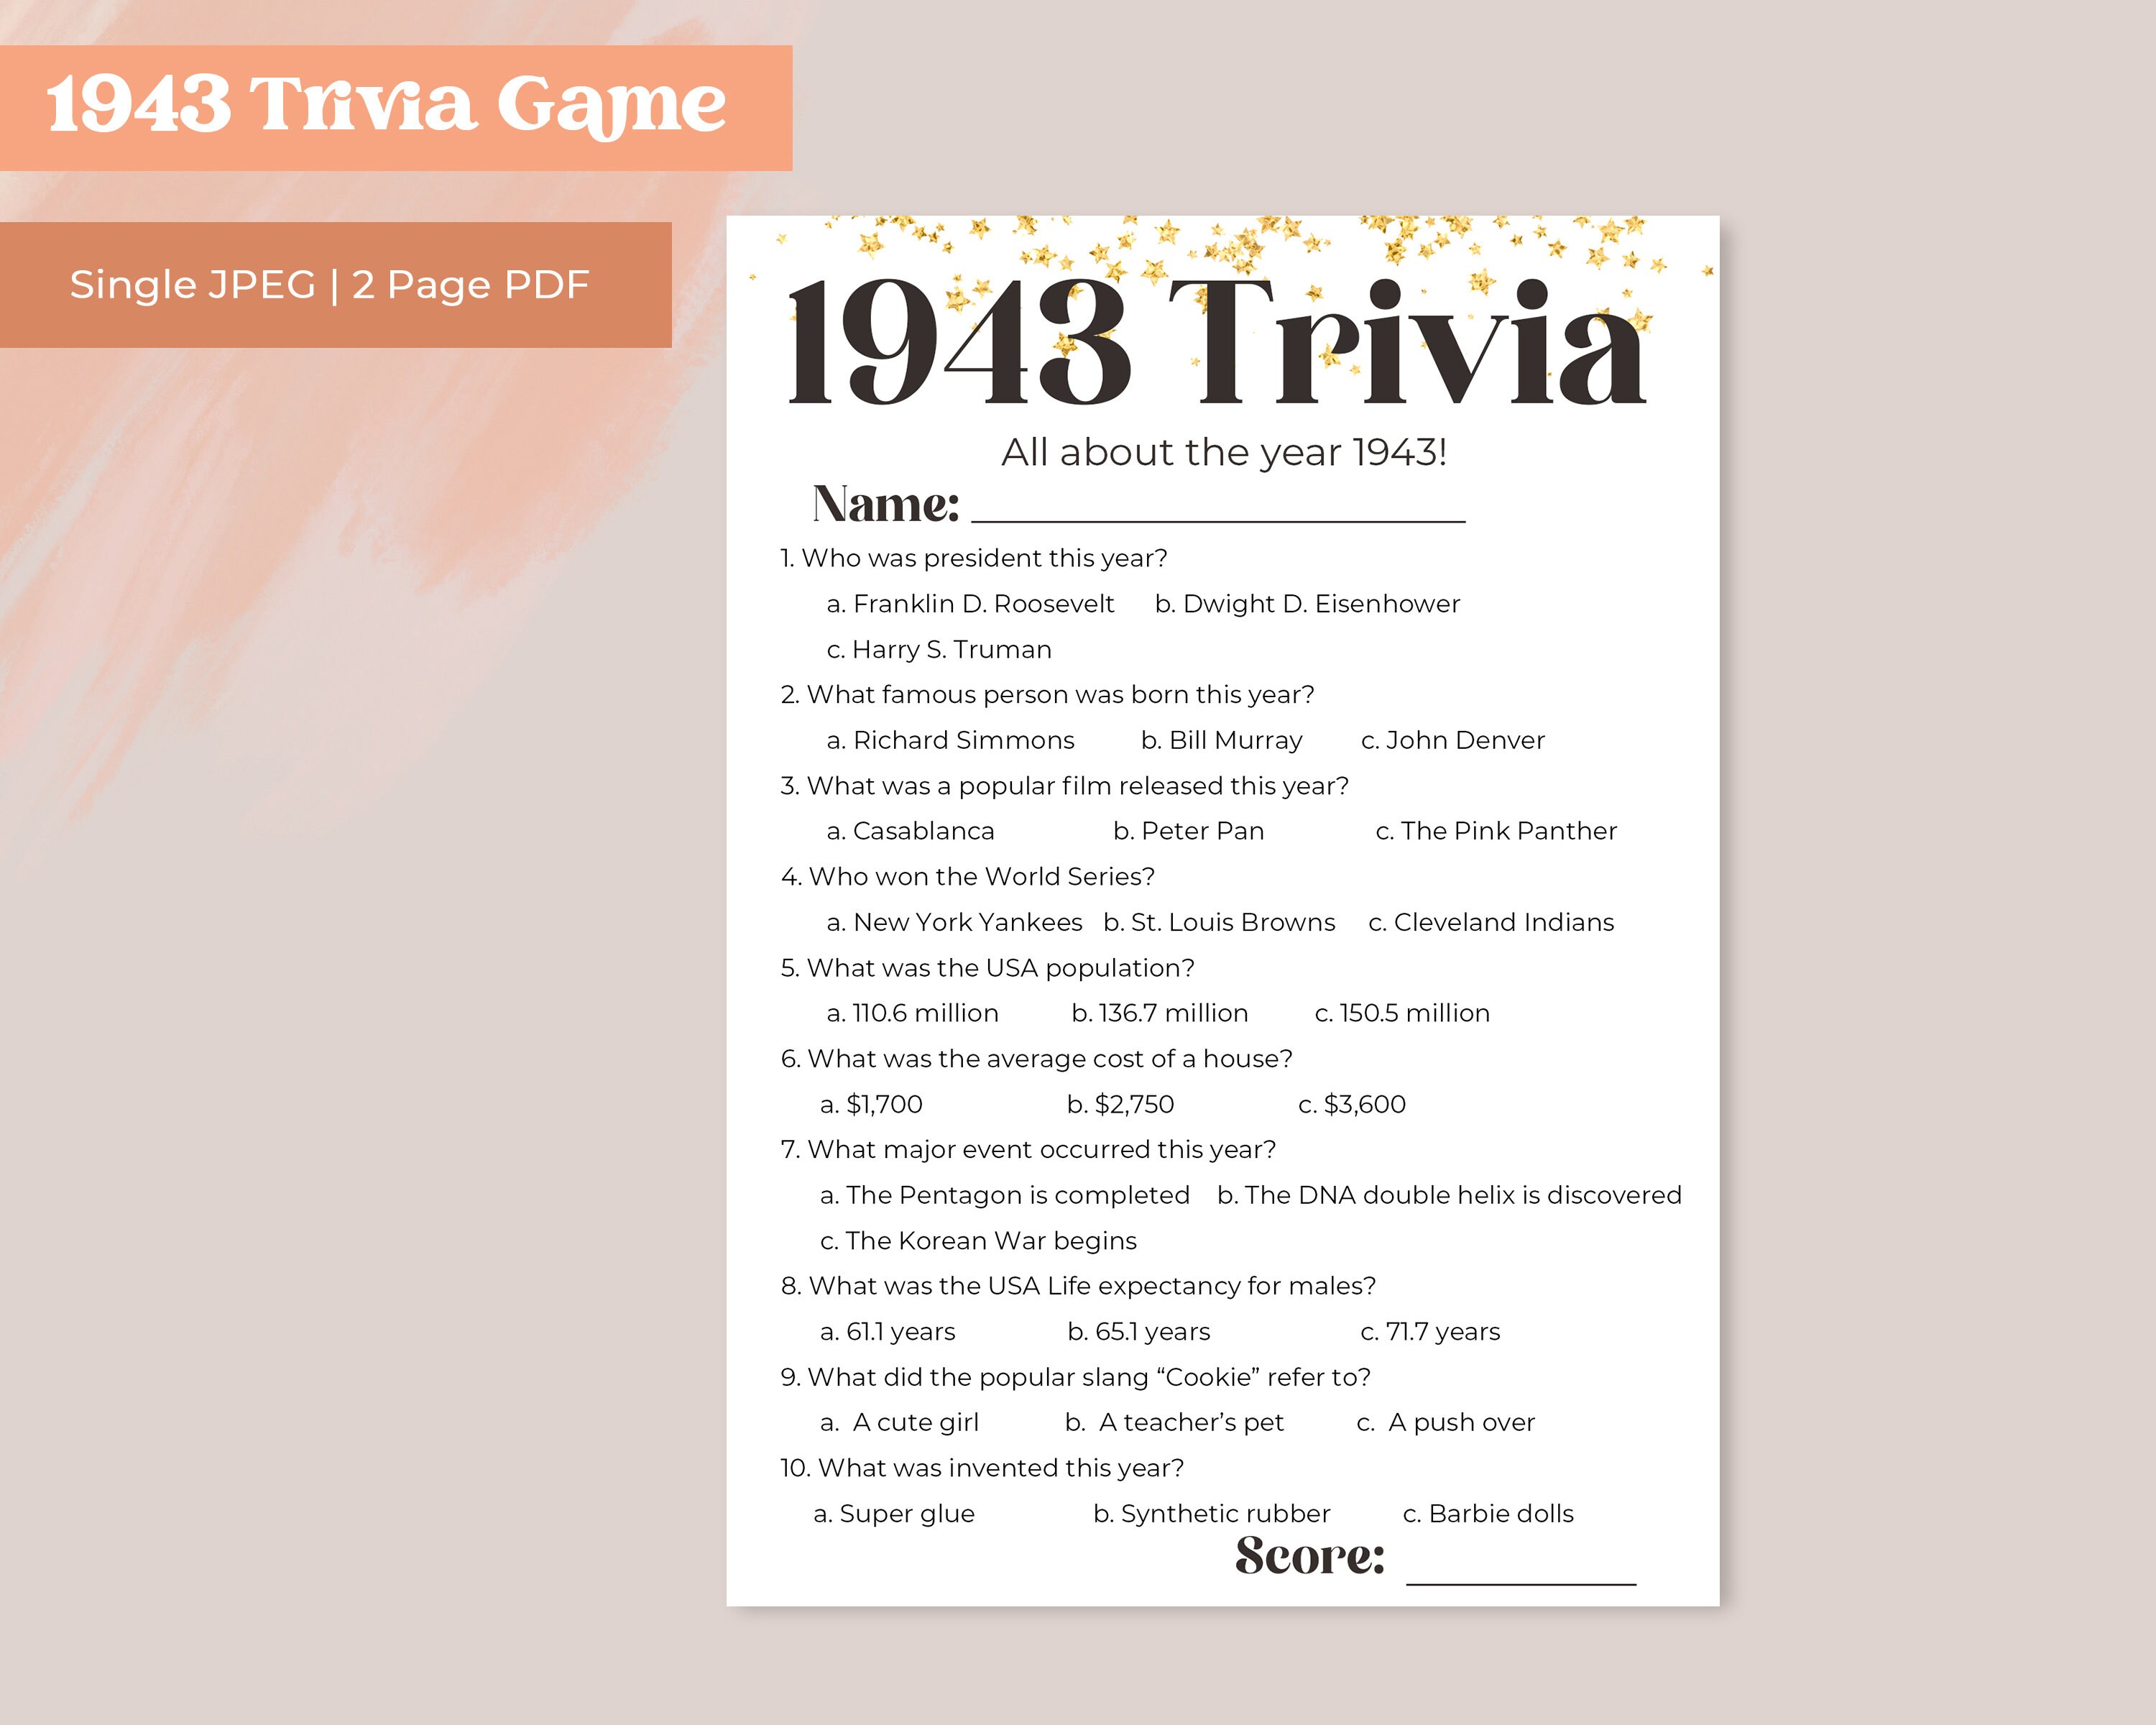 1943 Trivia Questions and Answers Printable